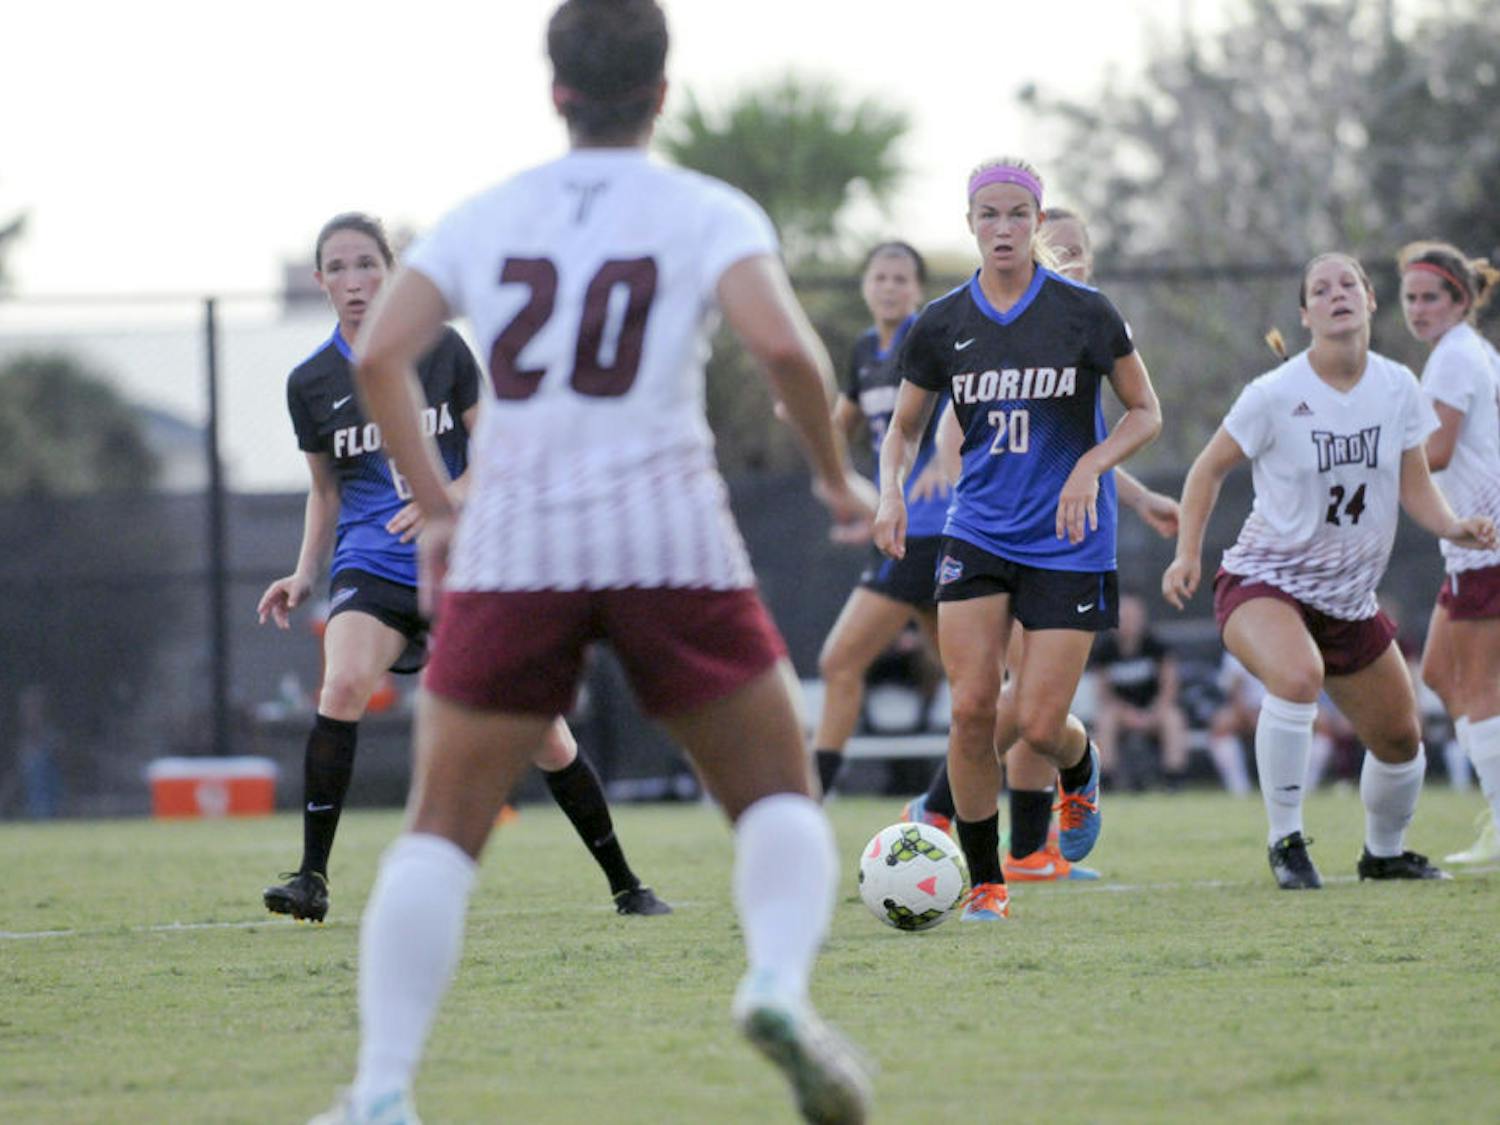 UF defender Christen Westphal dribbles during Florida's 2-1 win against Troy in an exhibition match on Aug. 11 at the soccer practice field at Donald R. Dizney Stadium.